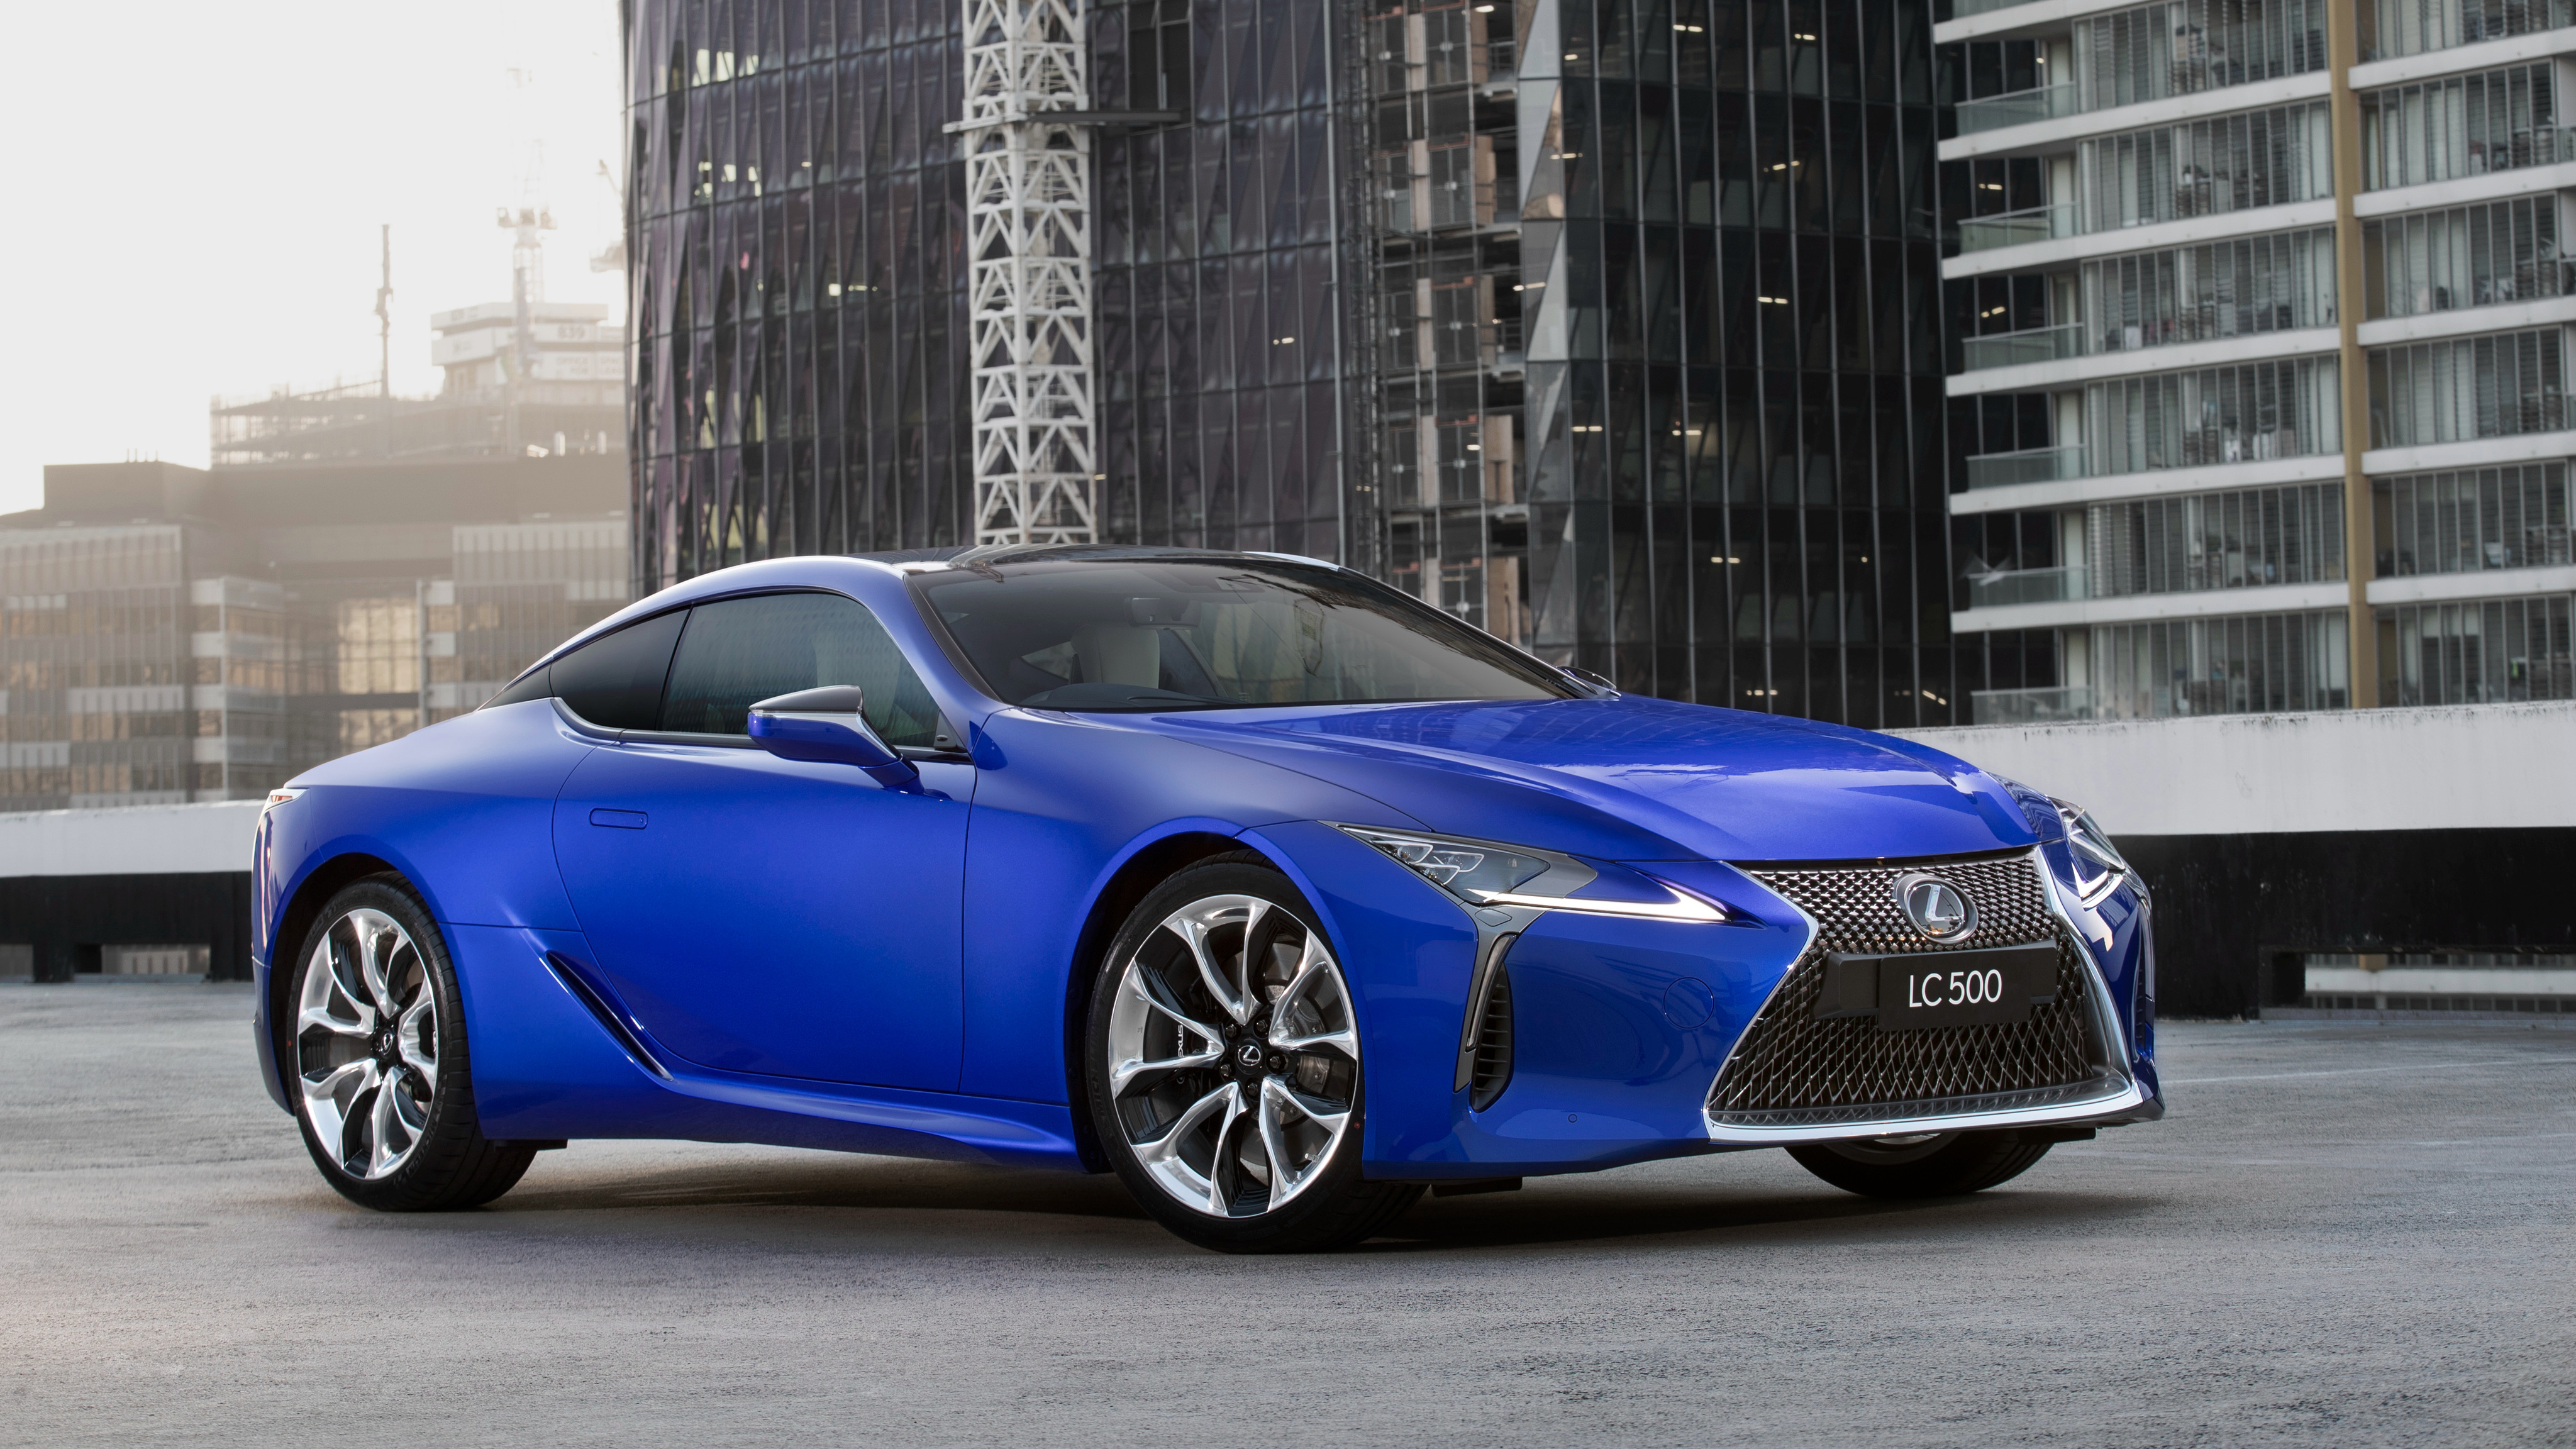 Lexus LC 500 Morphic Blue Limited Edition 2018 4K Wallpapers